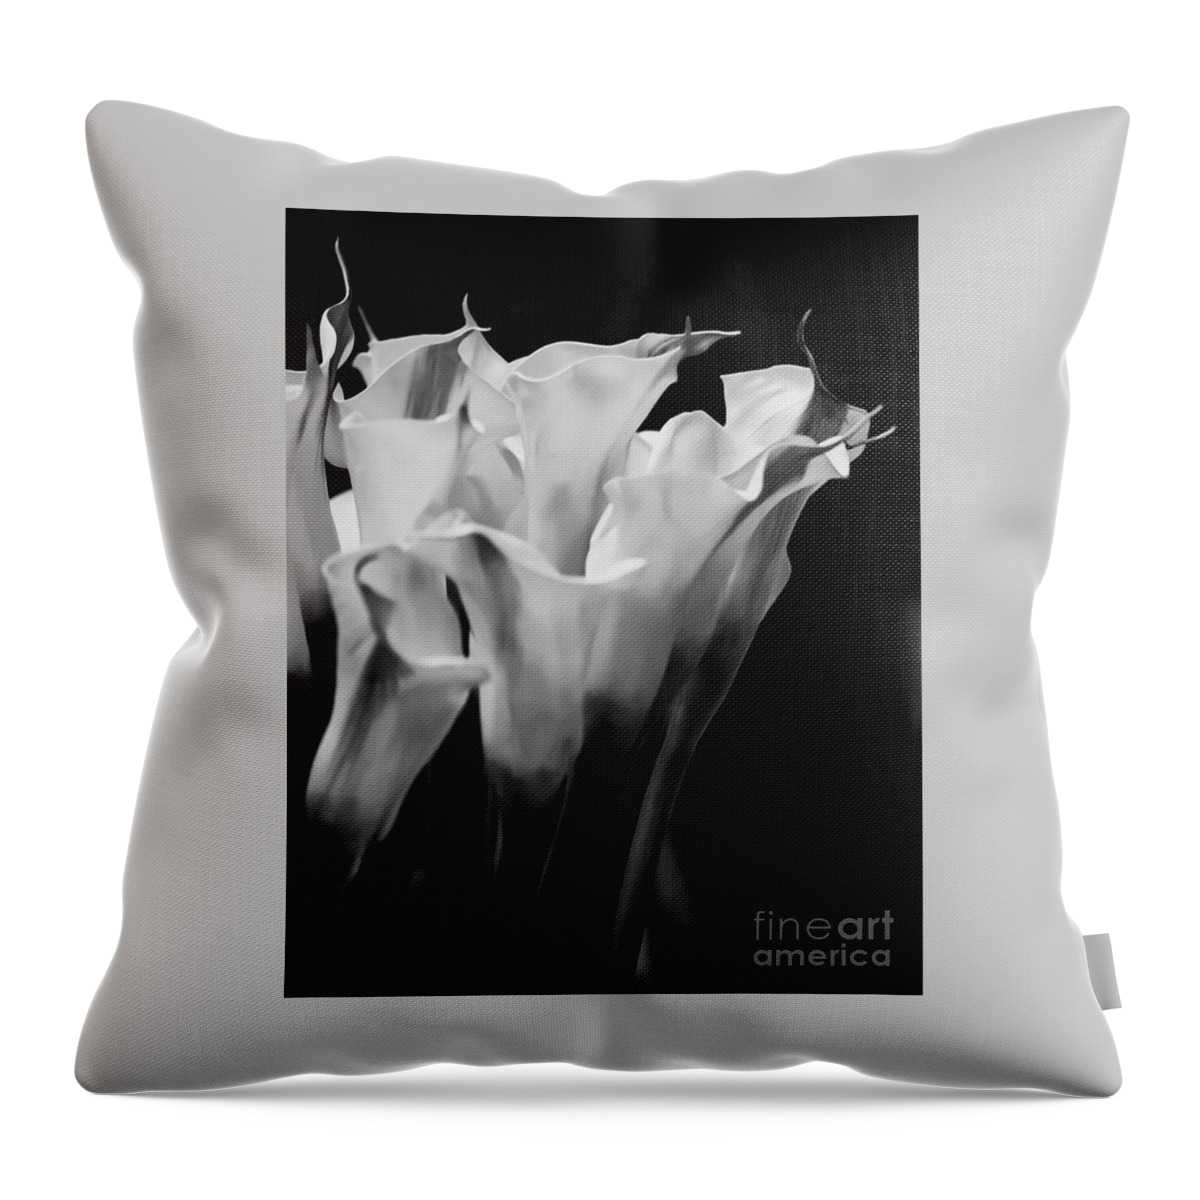 Calla Lily Throw Pillow featuring the photograph Calla Lily Flowers by James Aiken